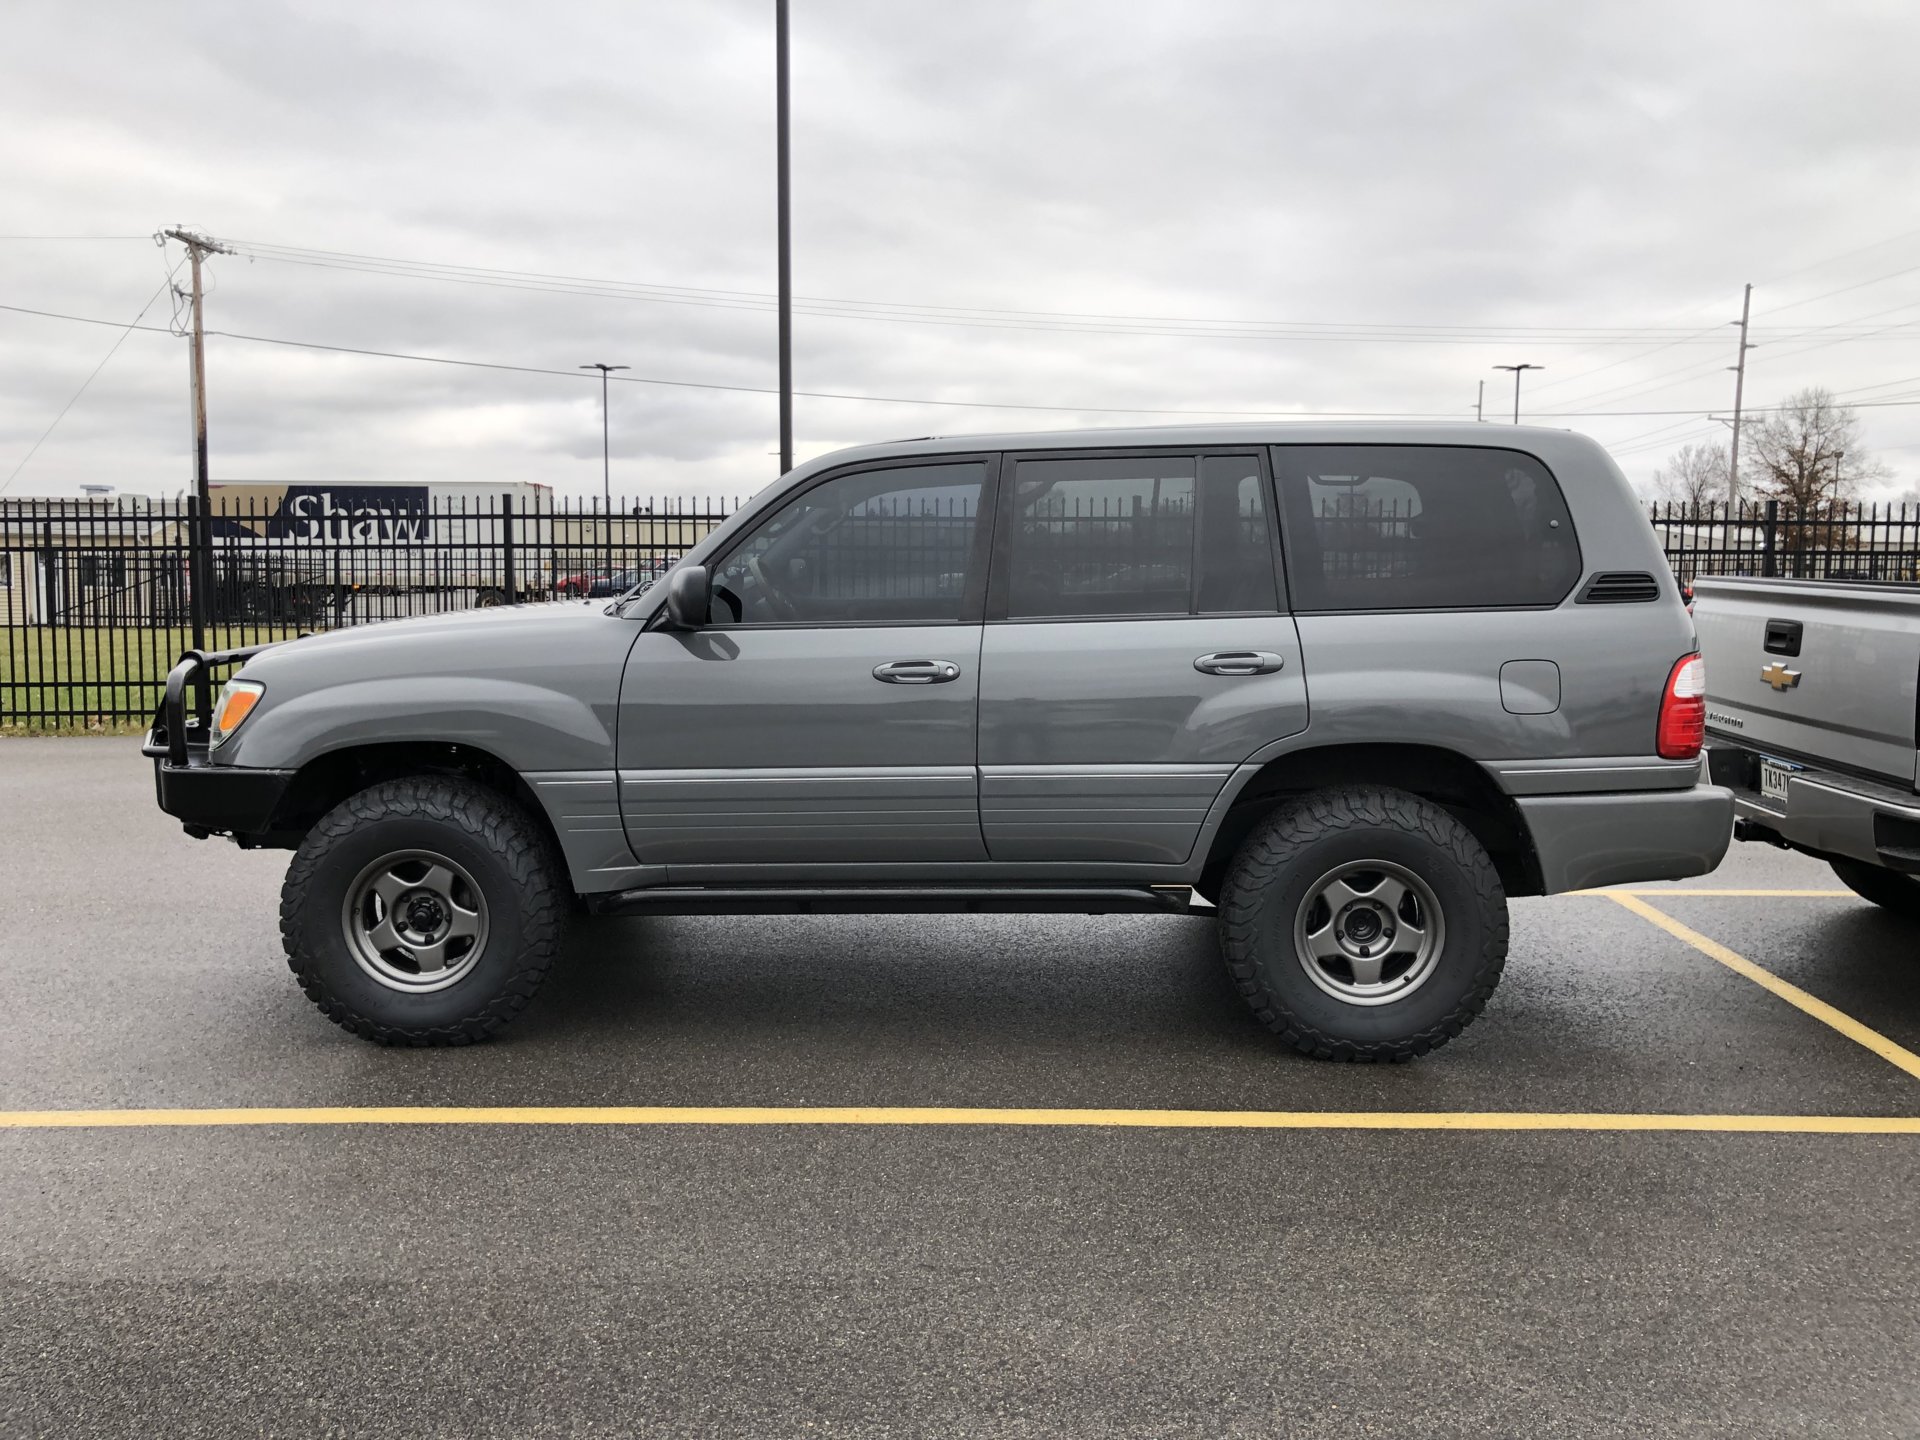 For Sale - 2004 Lexus LX470 65,000 miles, overland build. South Bend, IN |  IH8MUD Forum